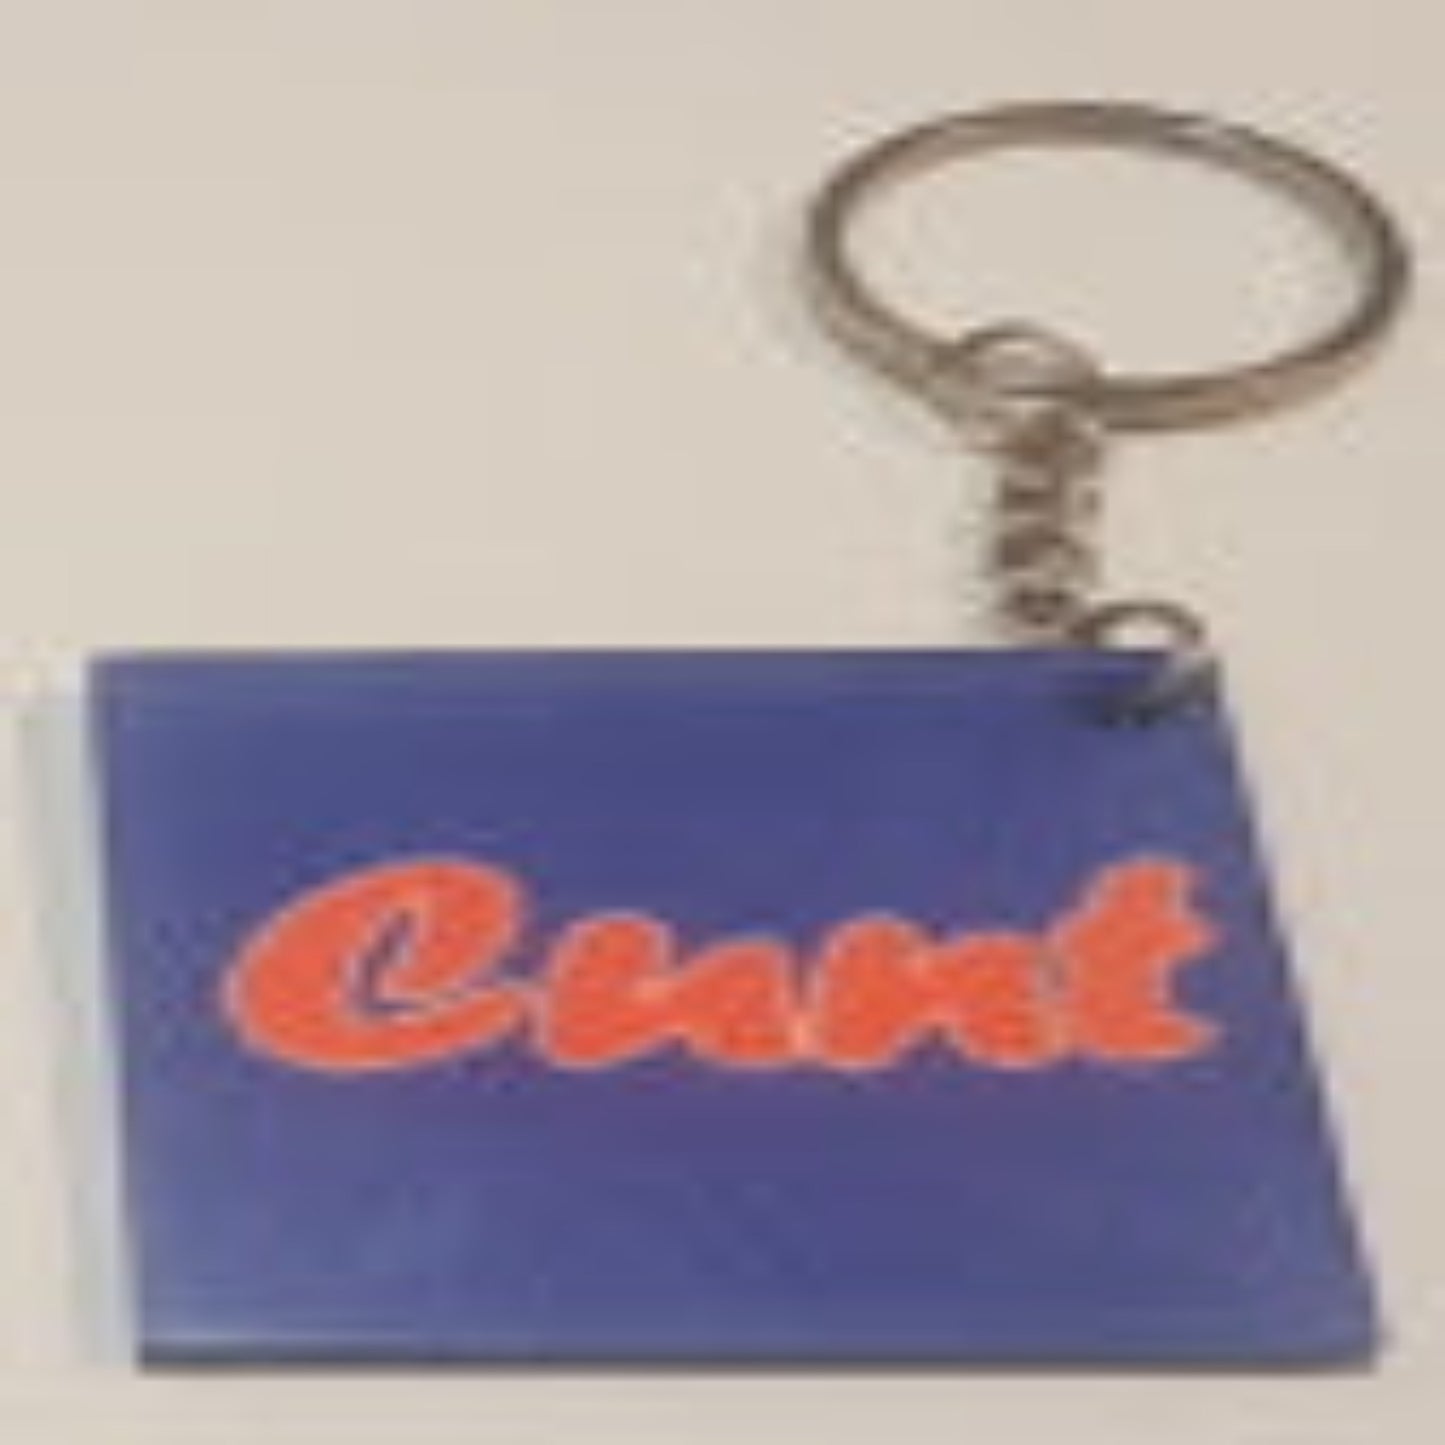 Offensive key chains